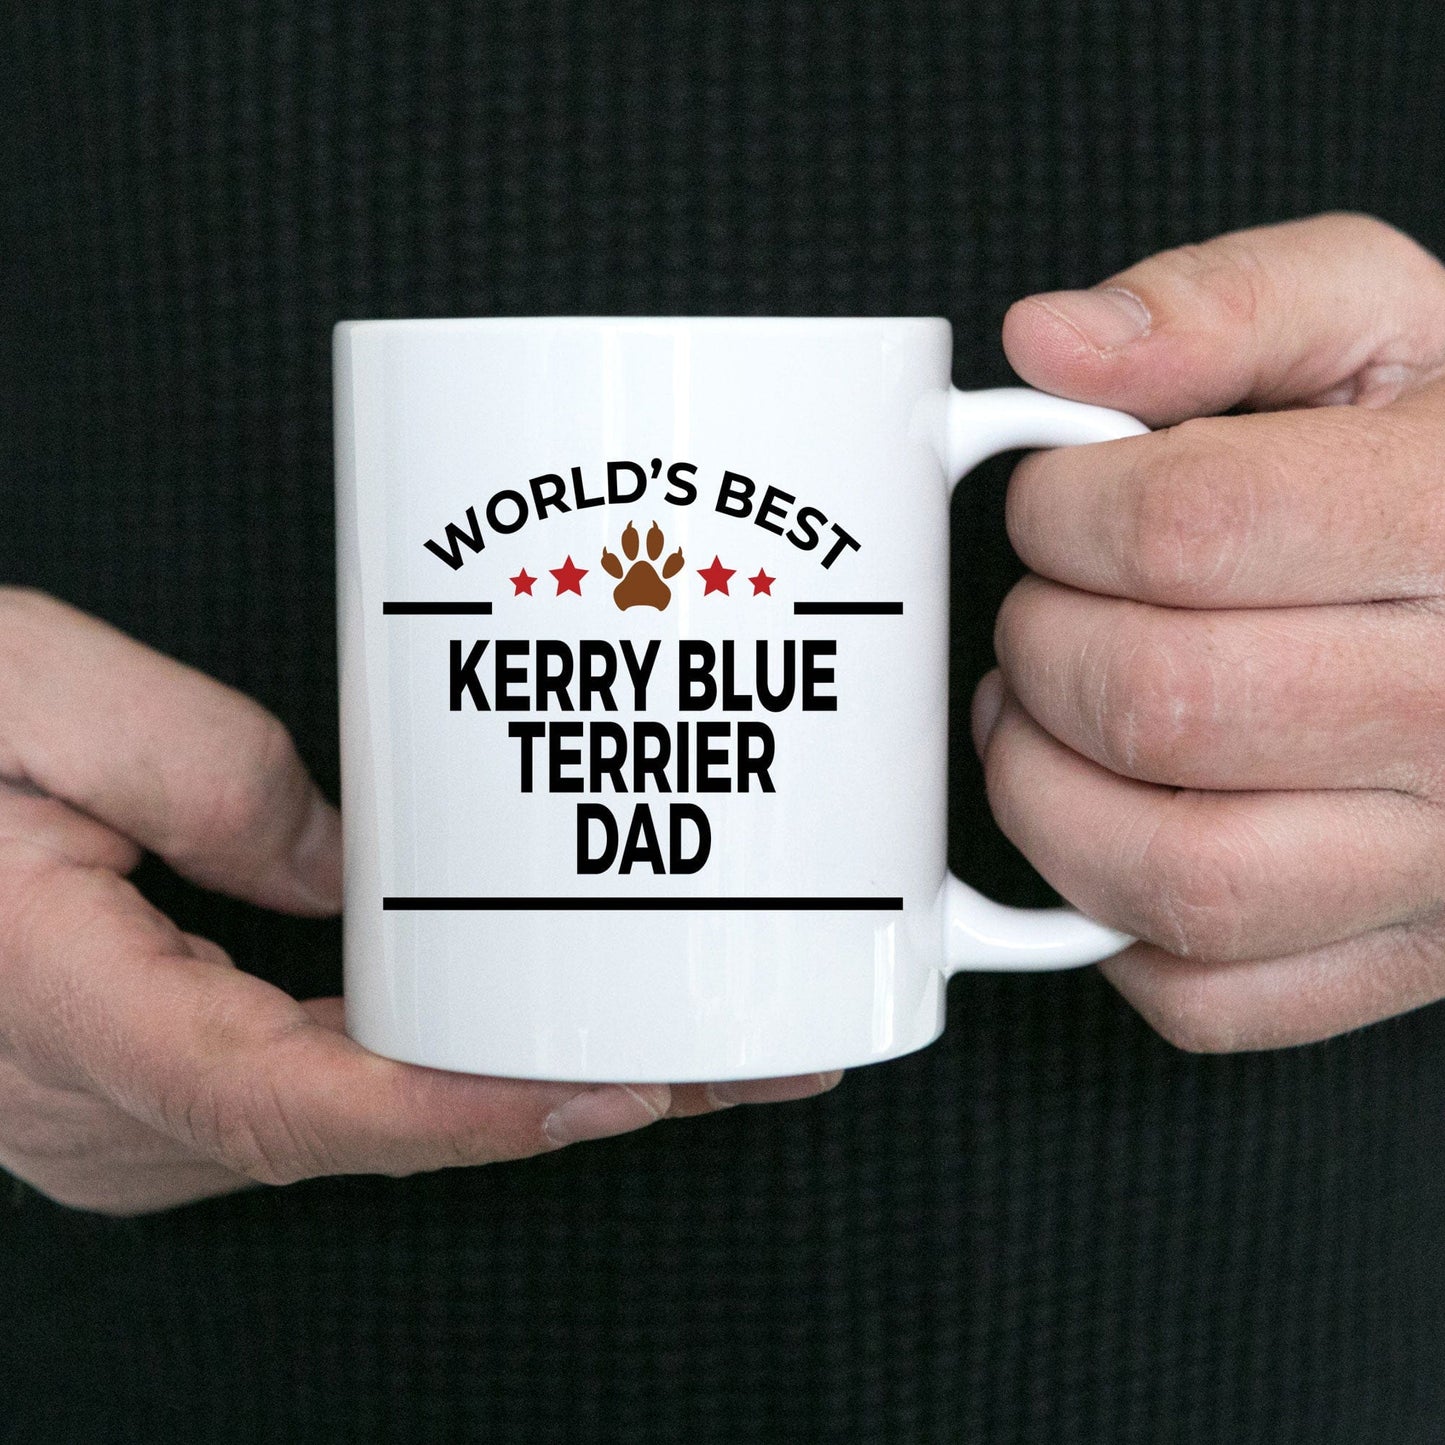 Kerry Blue Terrier Dog Lover Gift World's Best Dad Birthday Father's Day White Ceramic Coffee Mug